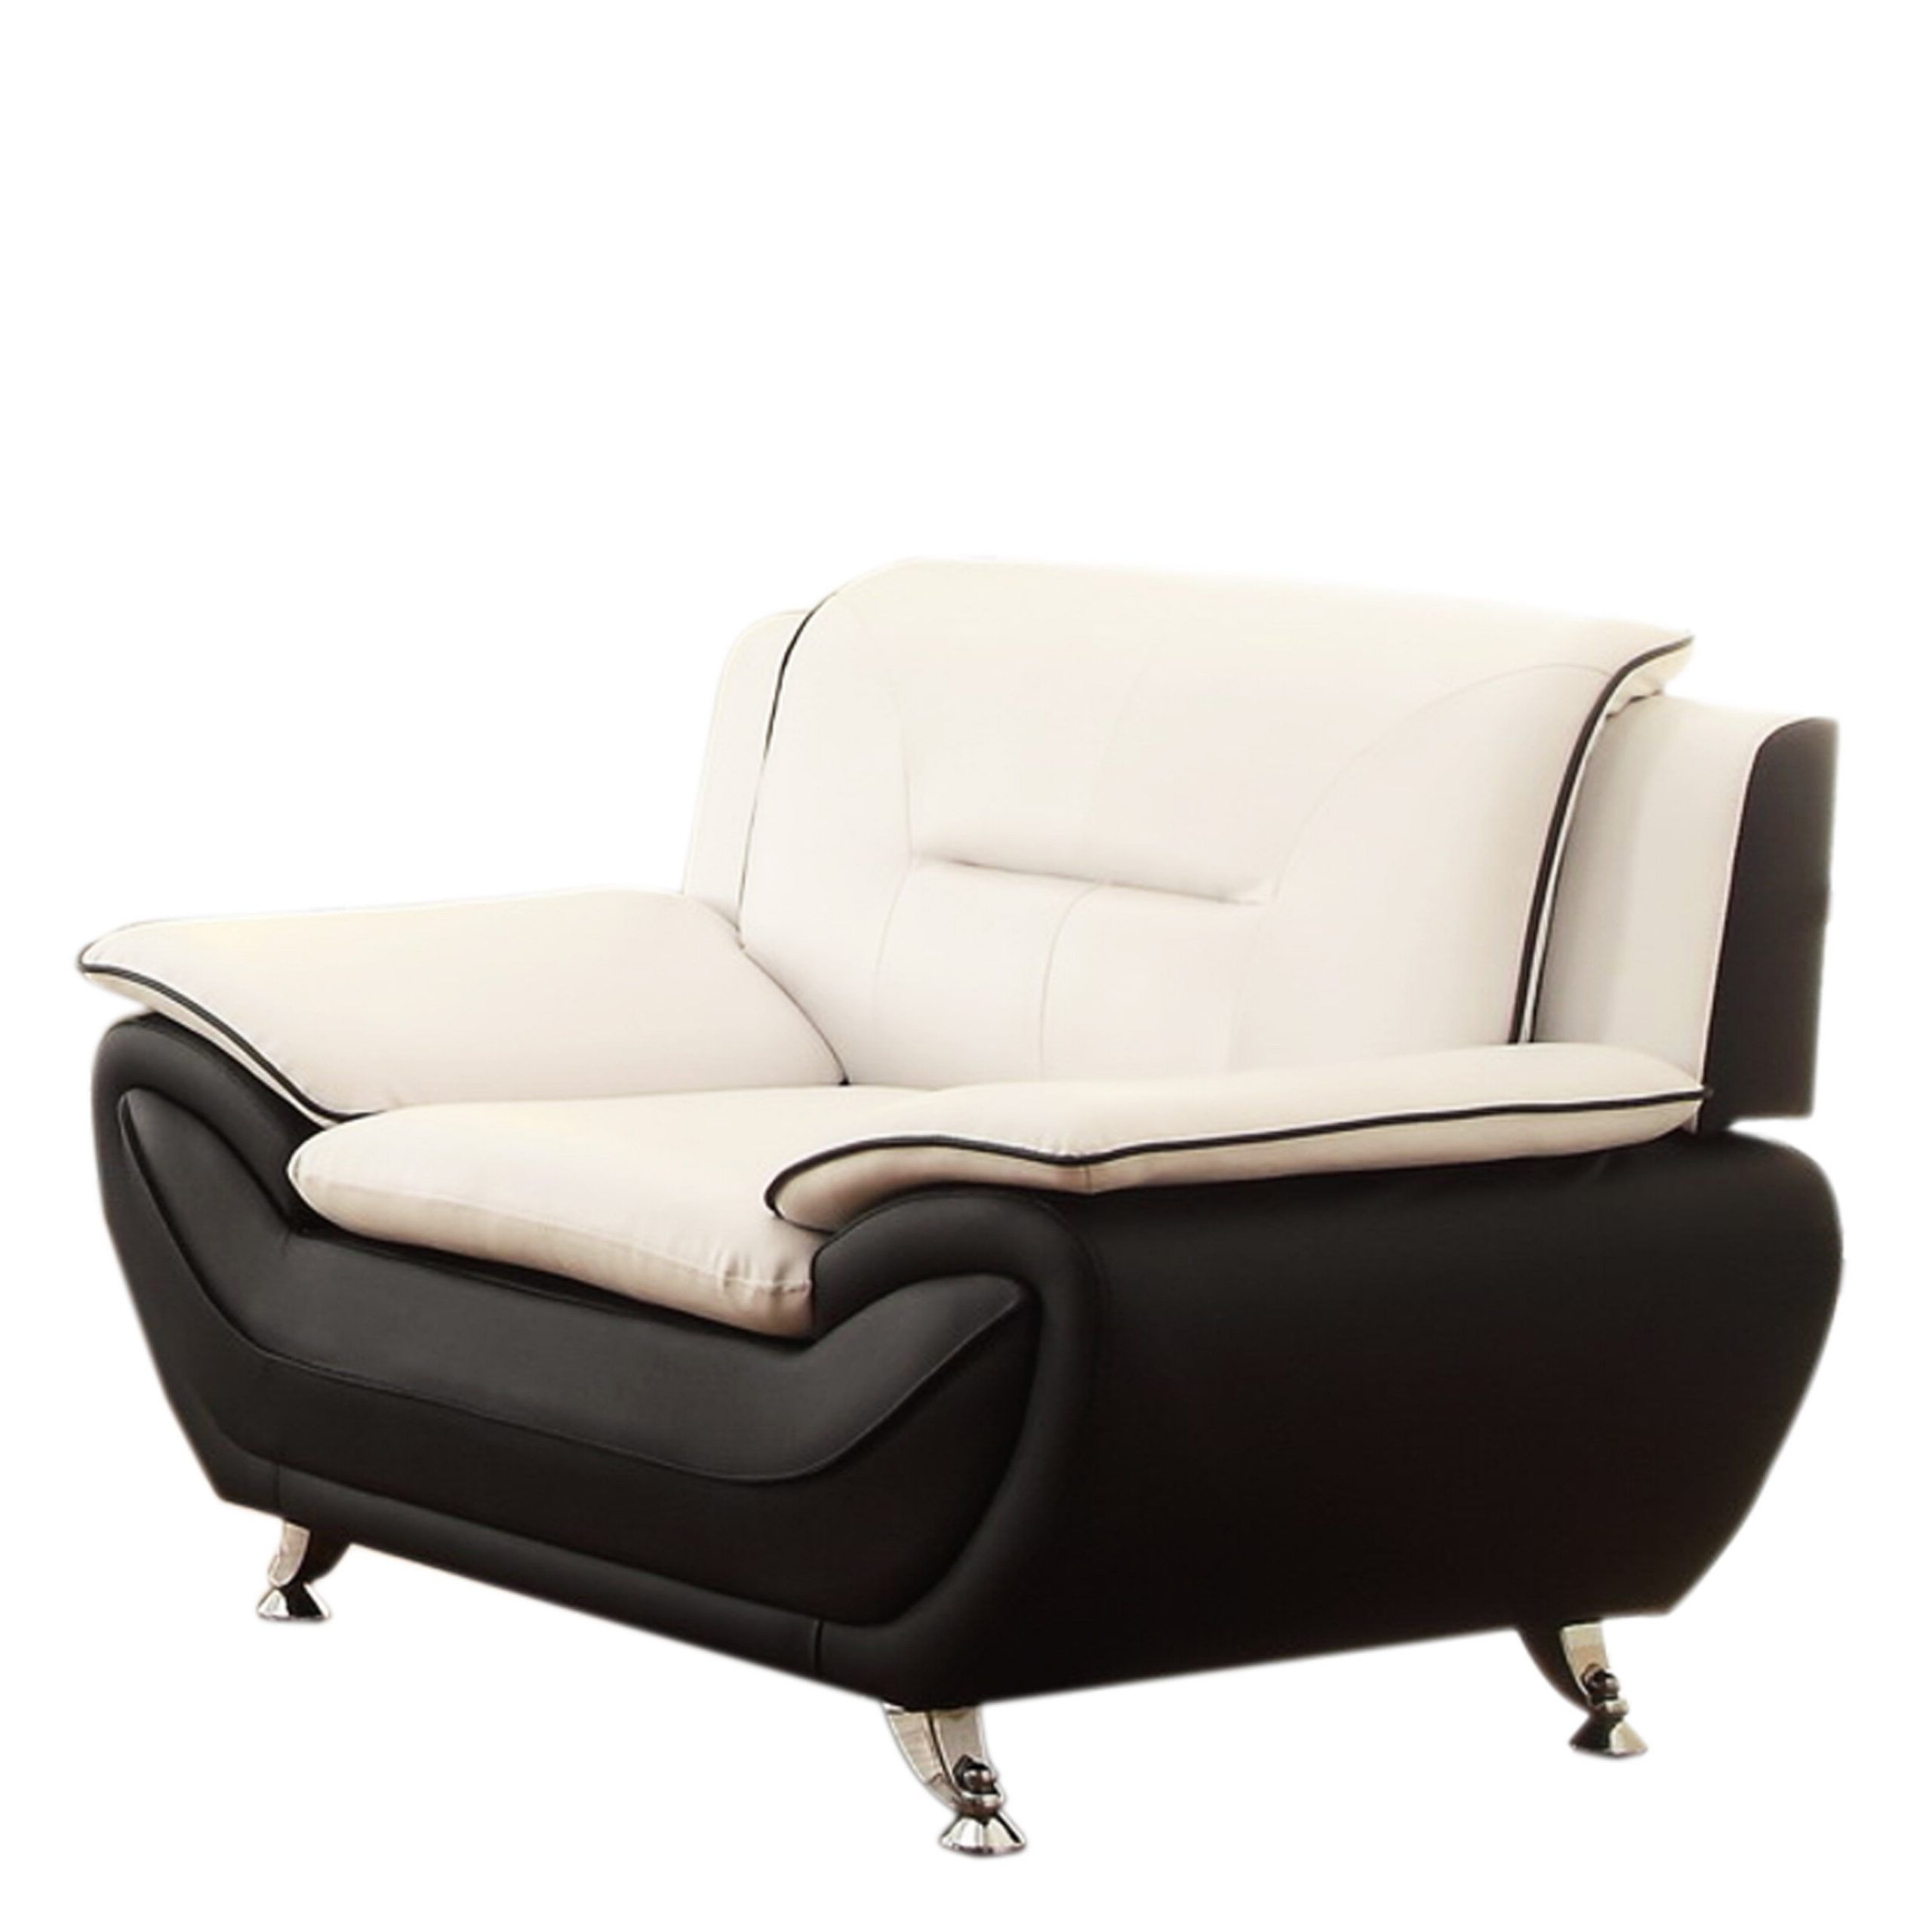 Brookhhurst Avina Armchairs In Most Recently Released Brookhhurst Avina Armchair (View 1 of 20)